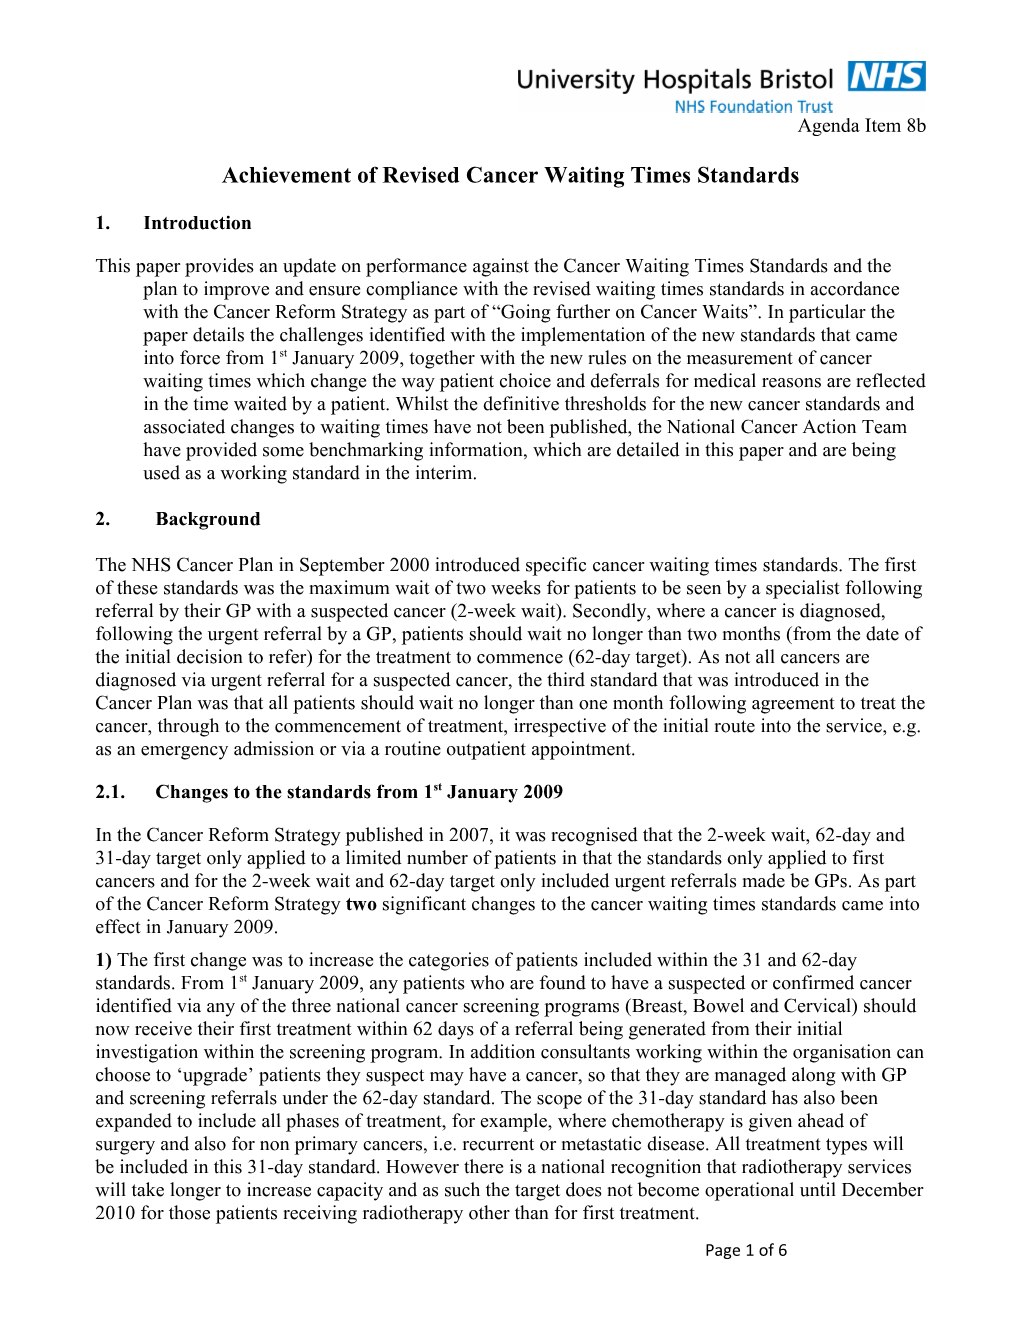 Achievement of Revised Cancer Waiting Times Standards